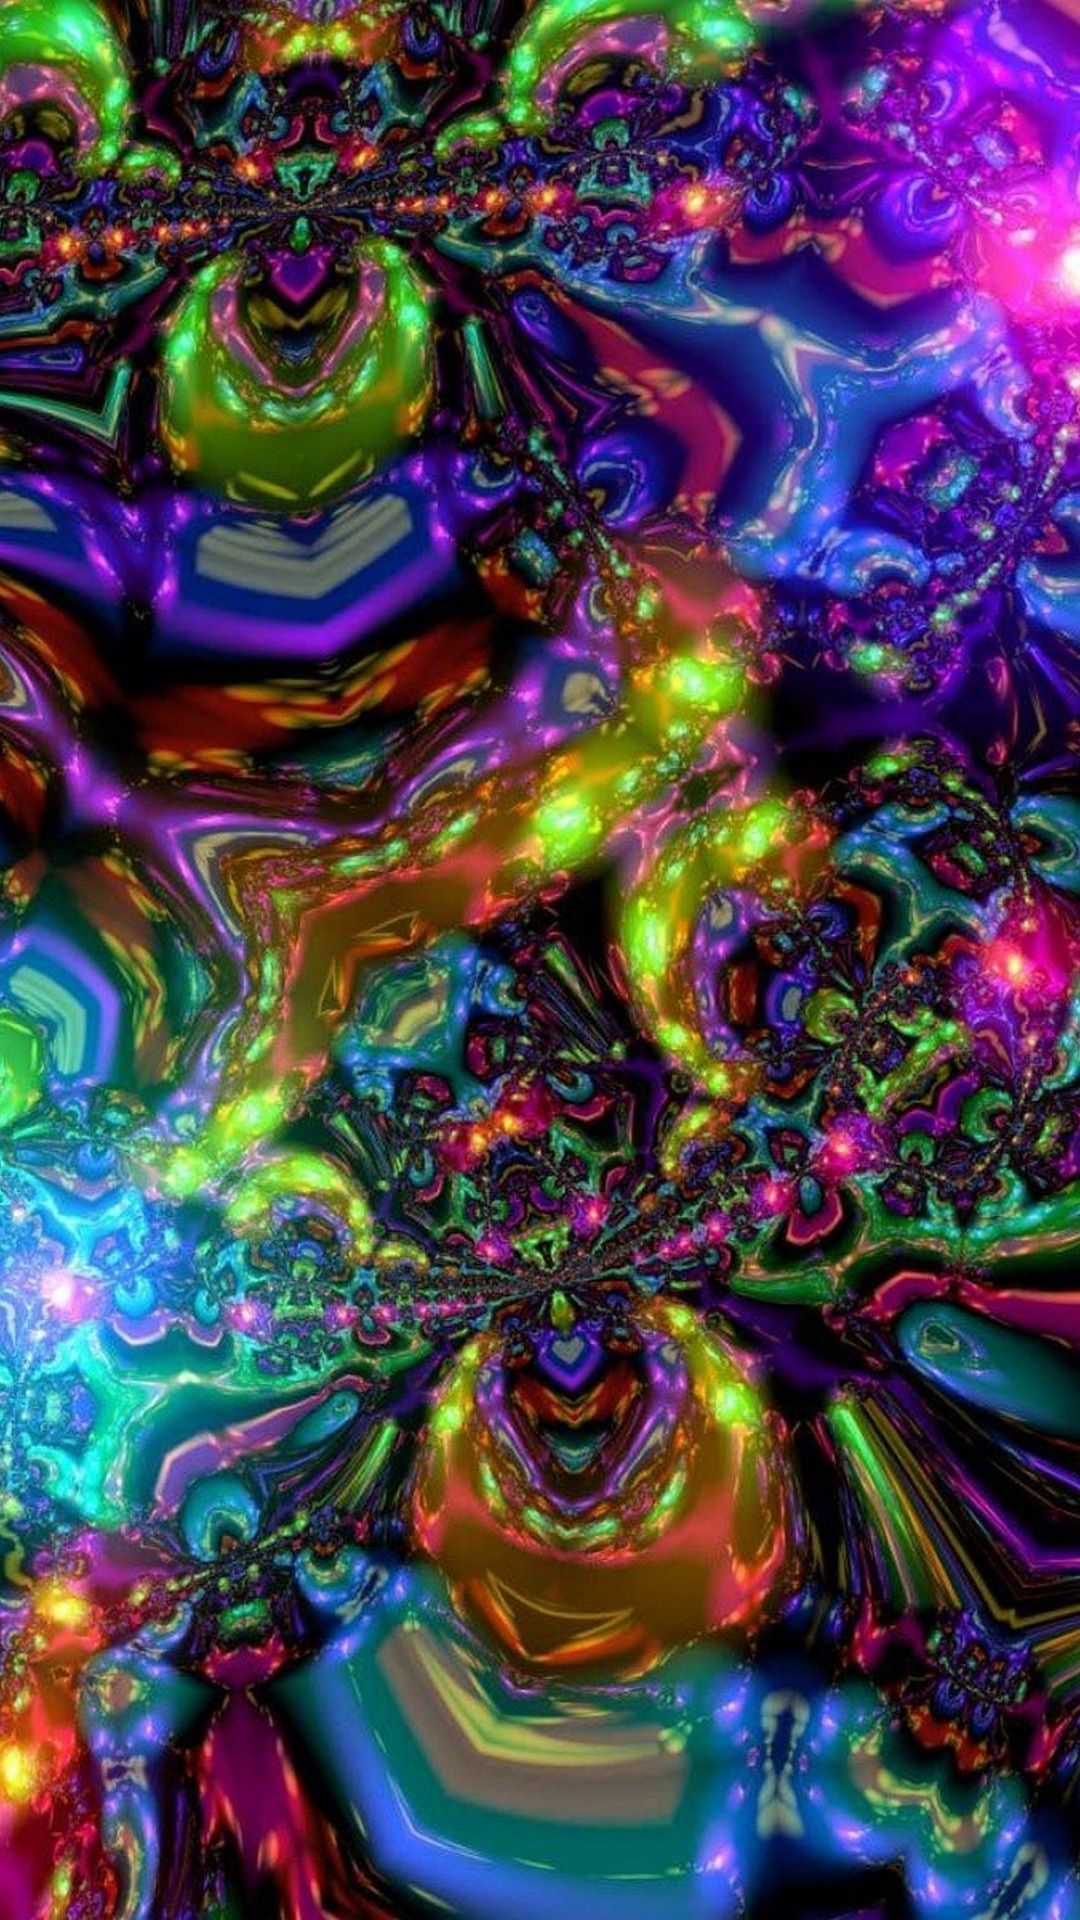 Collection of Psychedelic Wallpapers for Your iPhone Devices